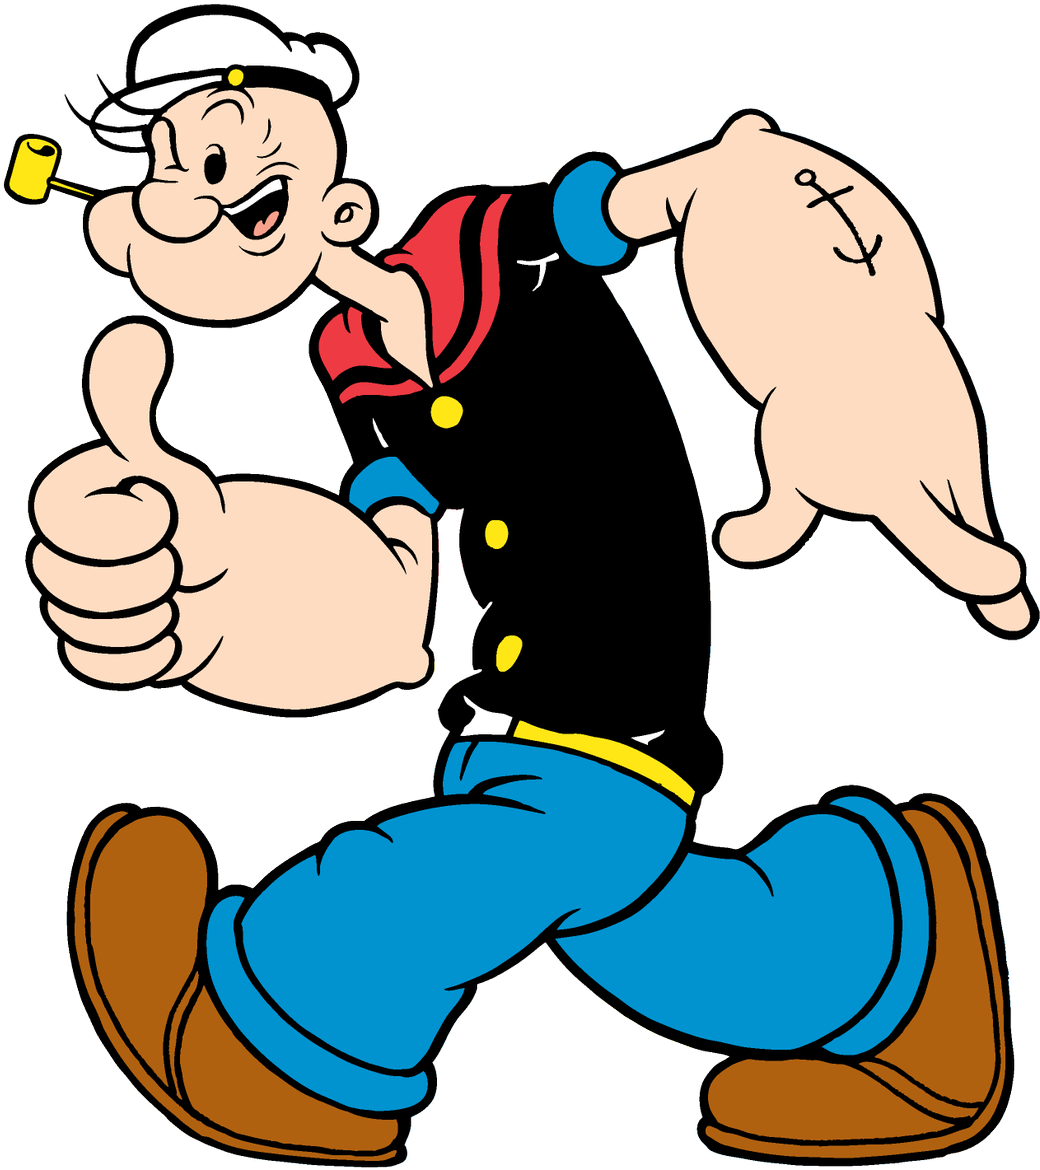 Popeye Thumbs Up Character Illustration PNG image